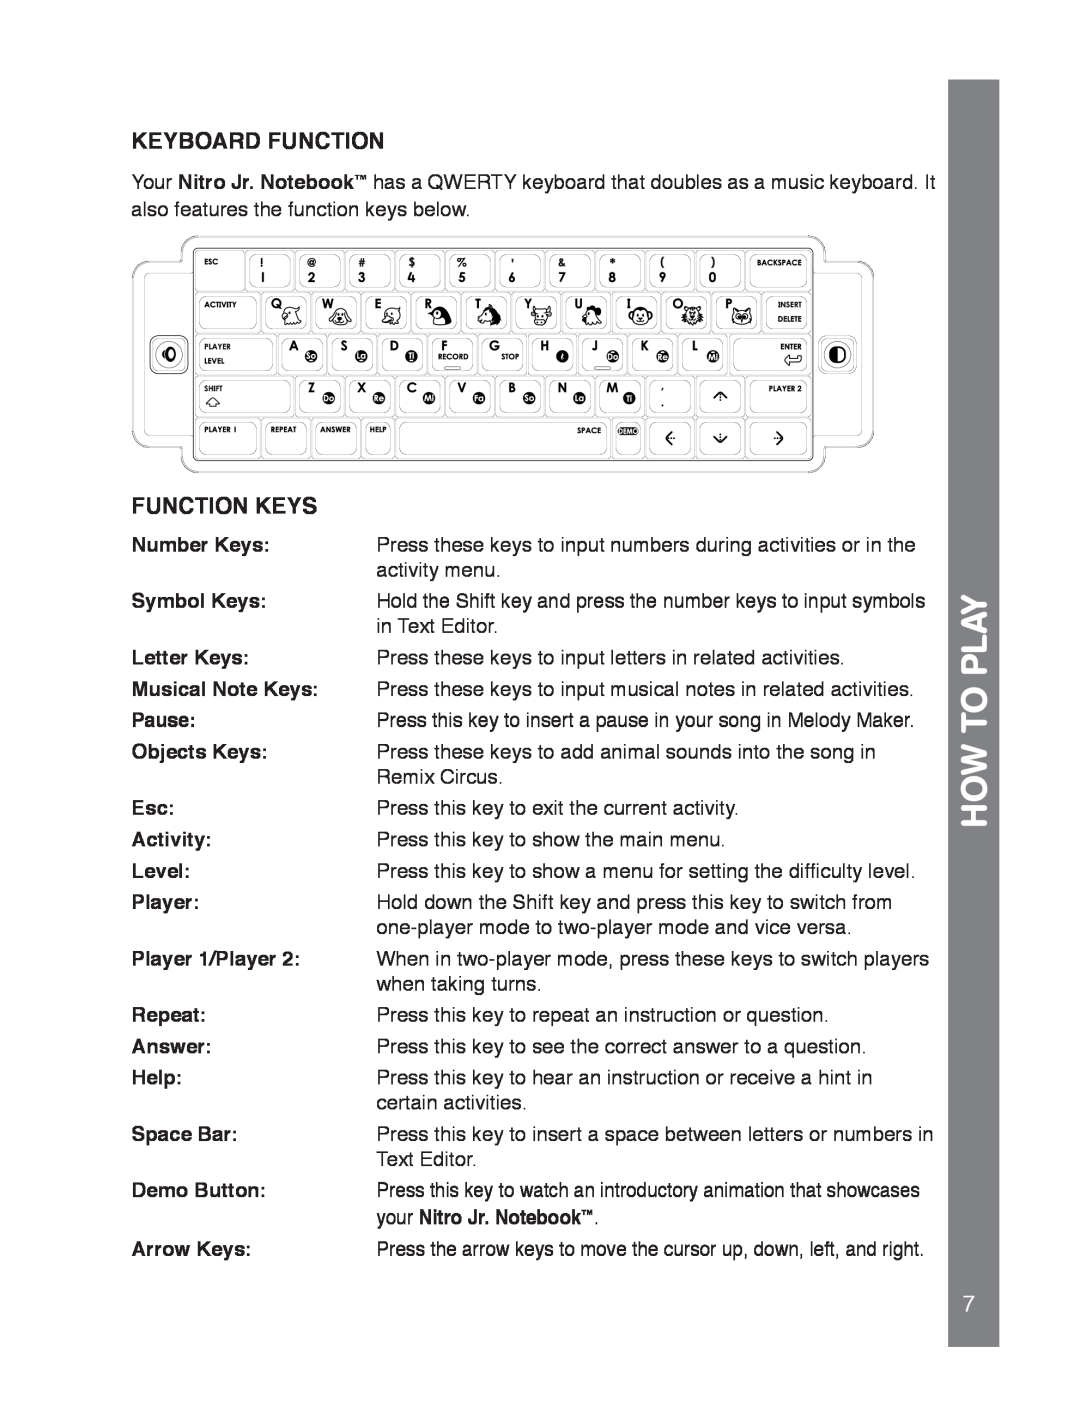 VTech 91-02239-001 manual How To Play, Keyboard Function, Function Keys 